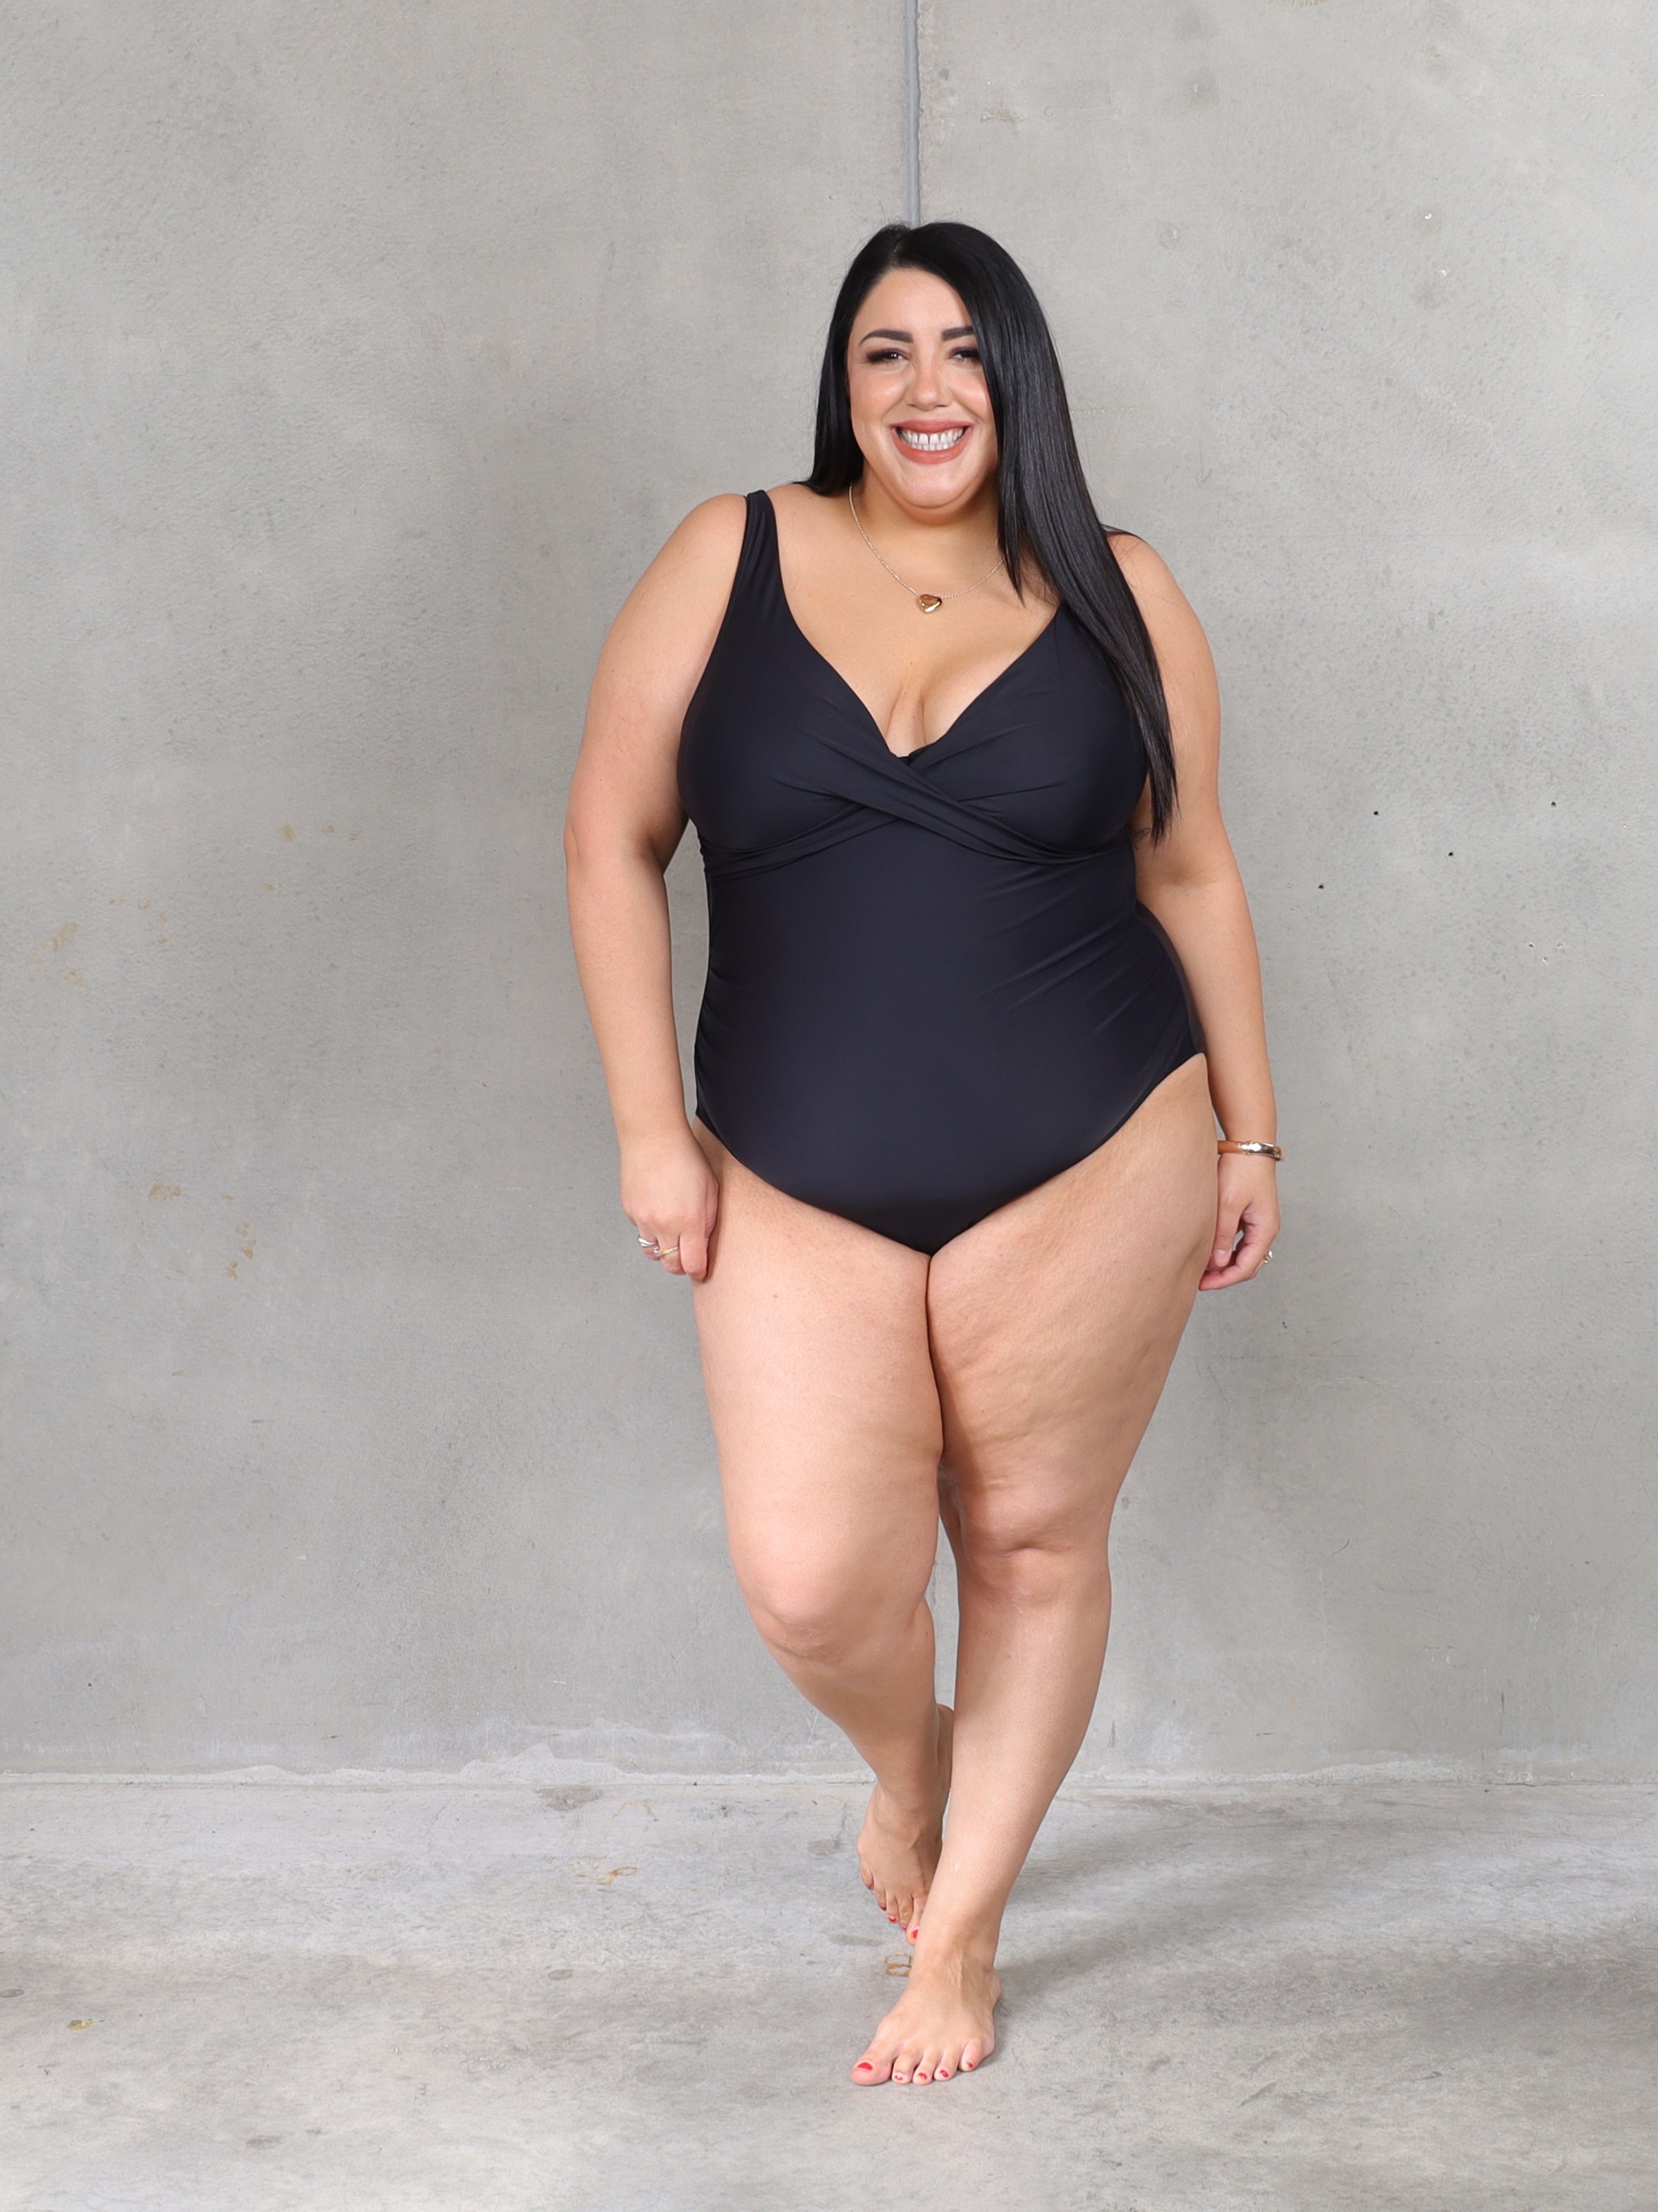 Plus Size Womens One Piece Bathing Suits